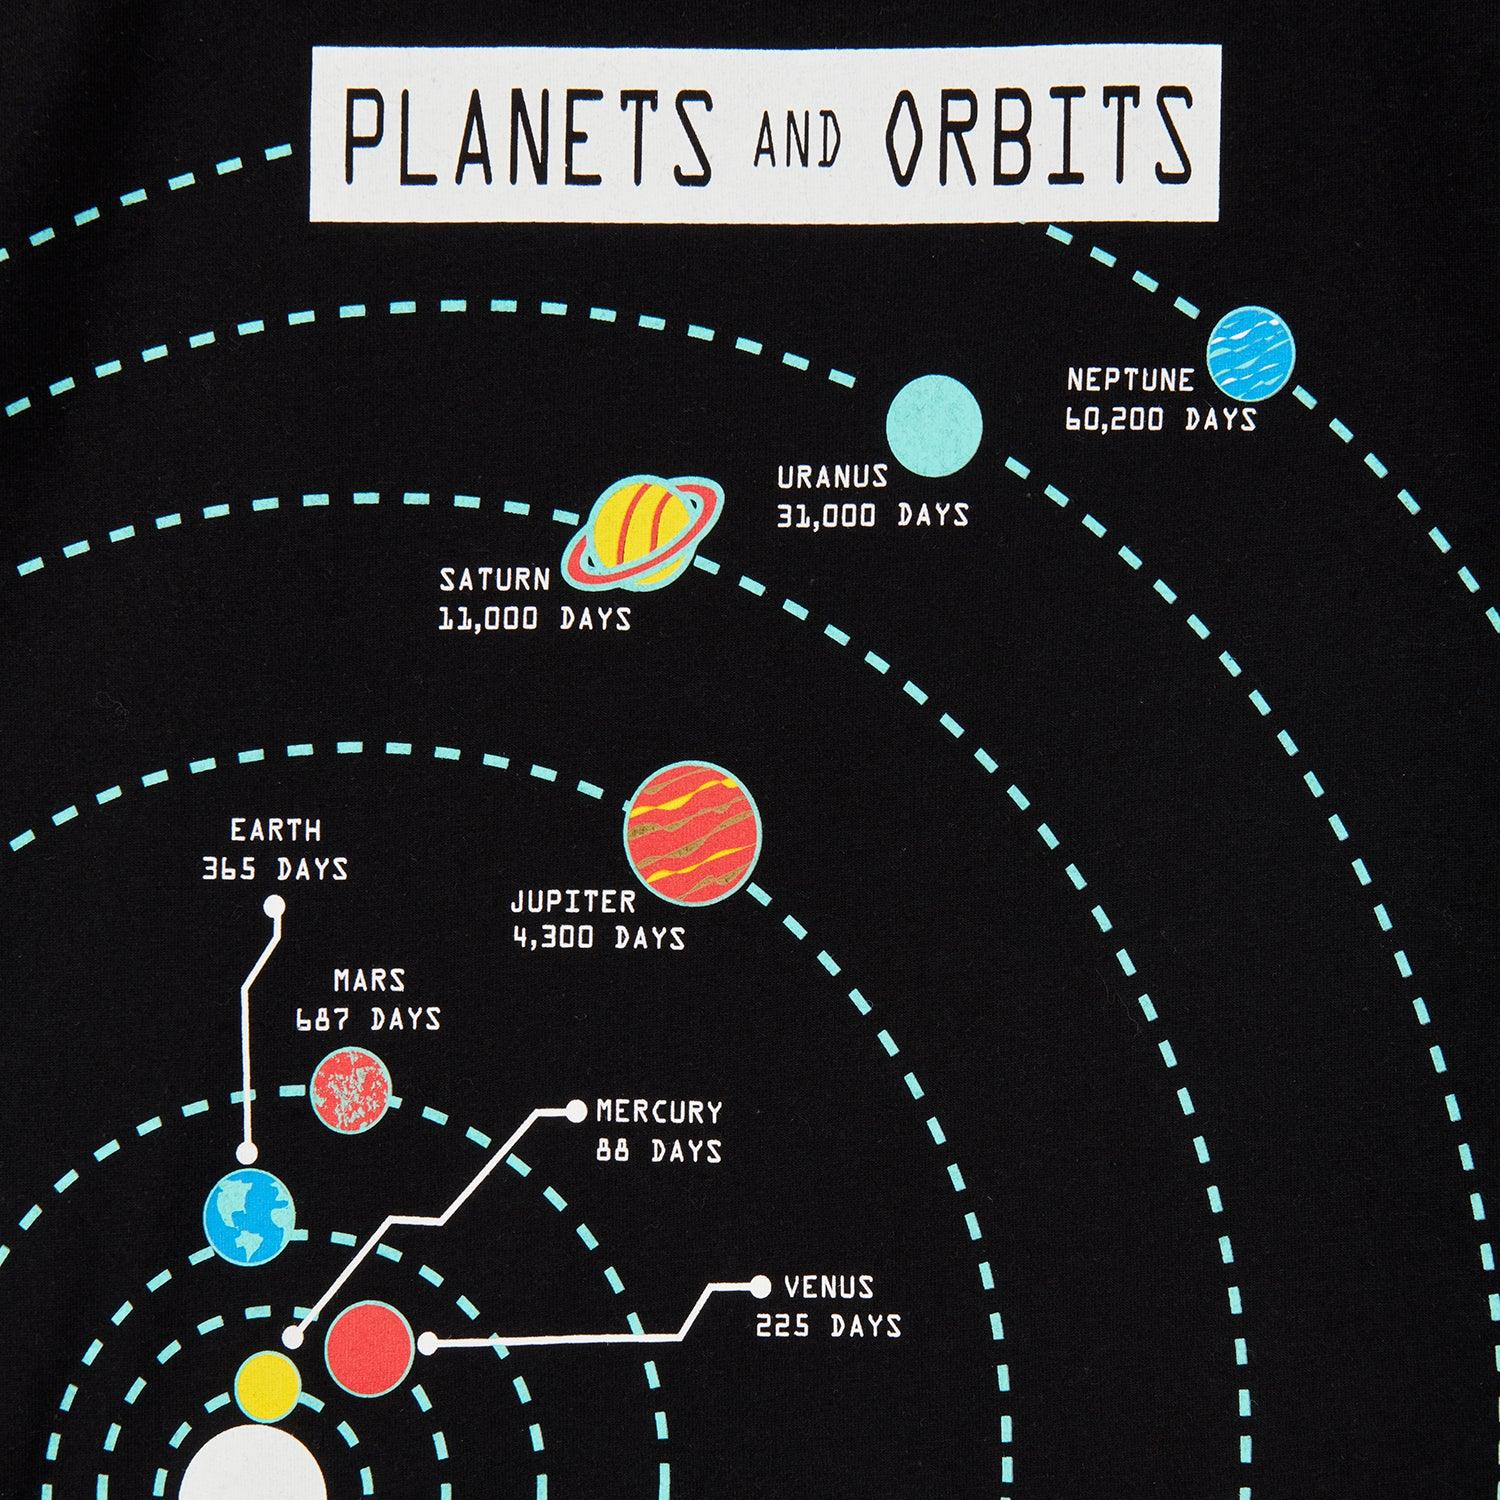 Science Museum Glowing Planets Kids T-Shirt - Clothing - Science Museum Shop